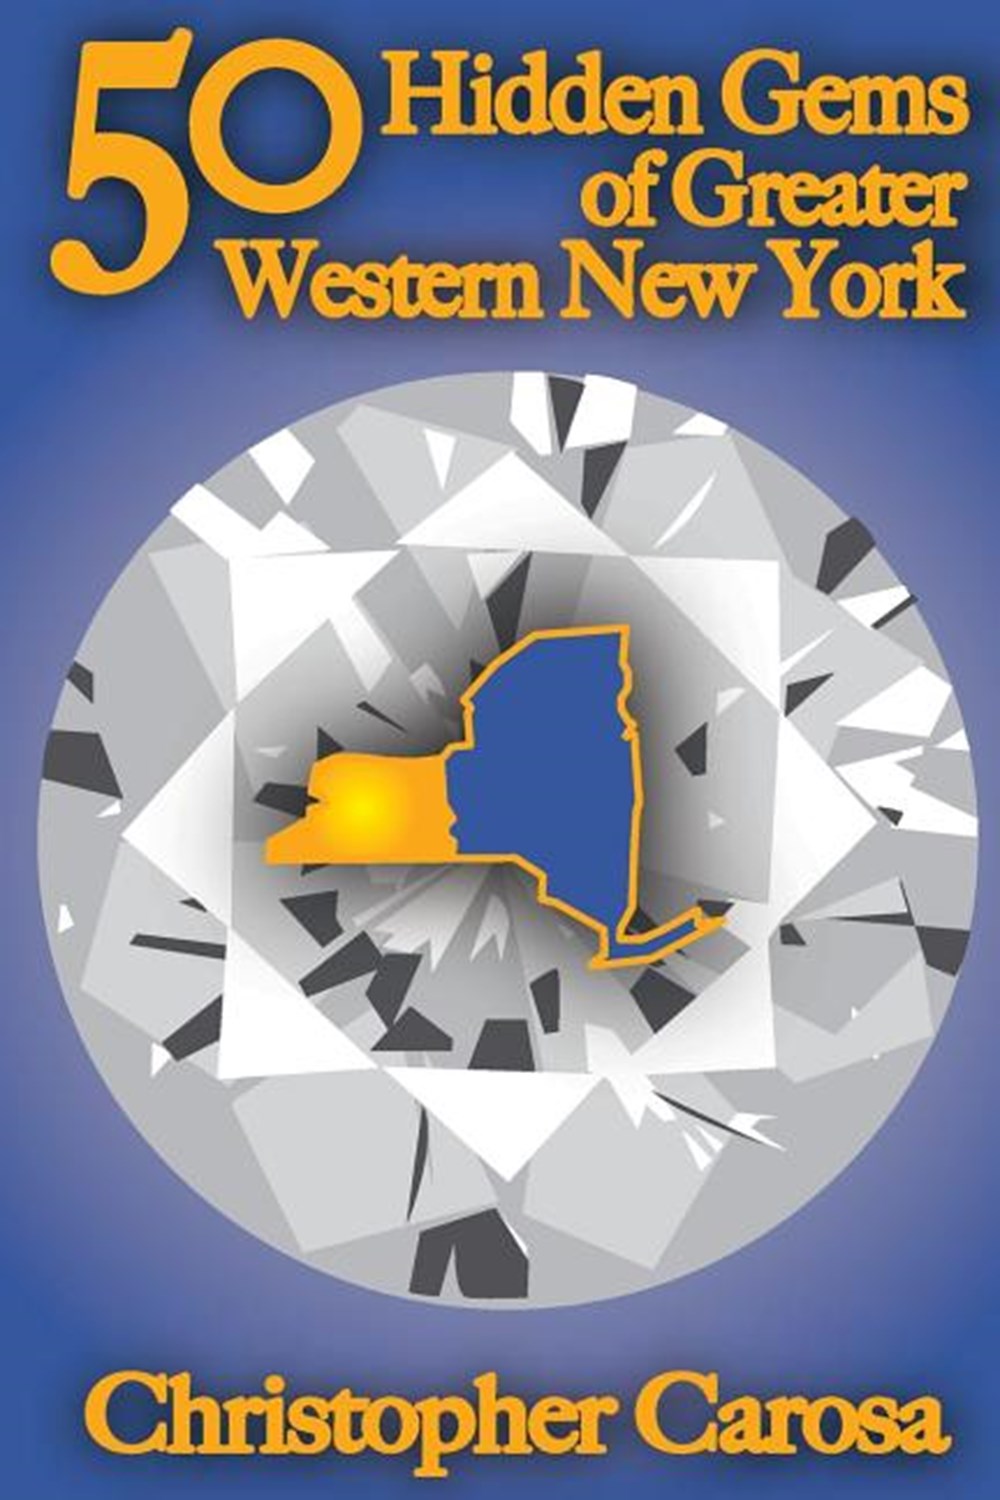 50 Hidden Gems of Greater Western New York: A handbook for those too proud to believe "wide right" a